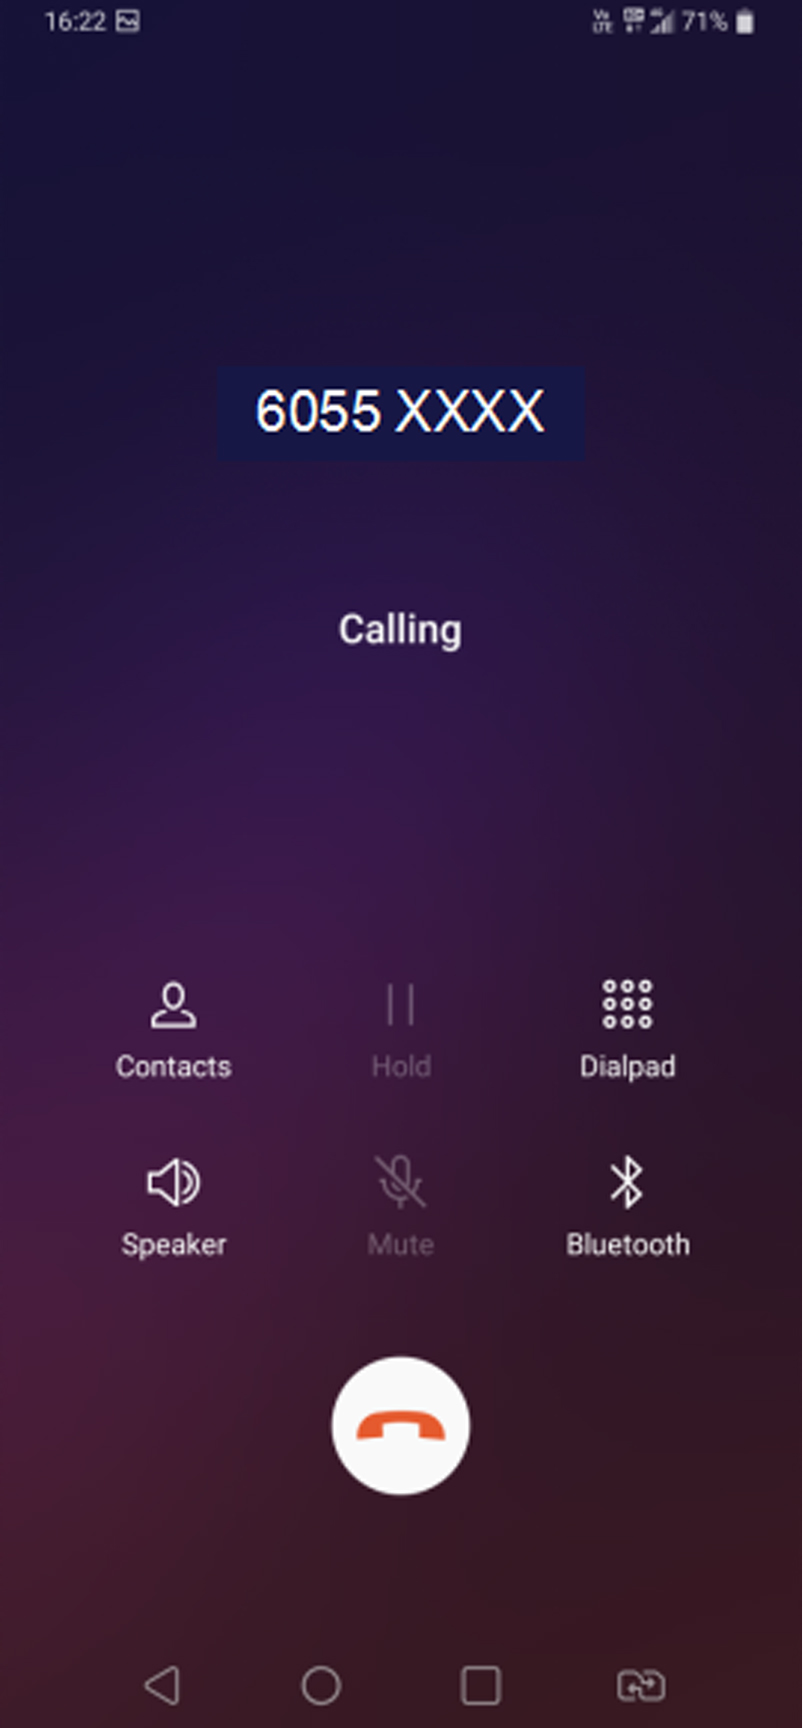 If both users are enjoying VoLTE, the call connection just need as fast as 1 second!